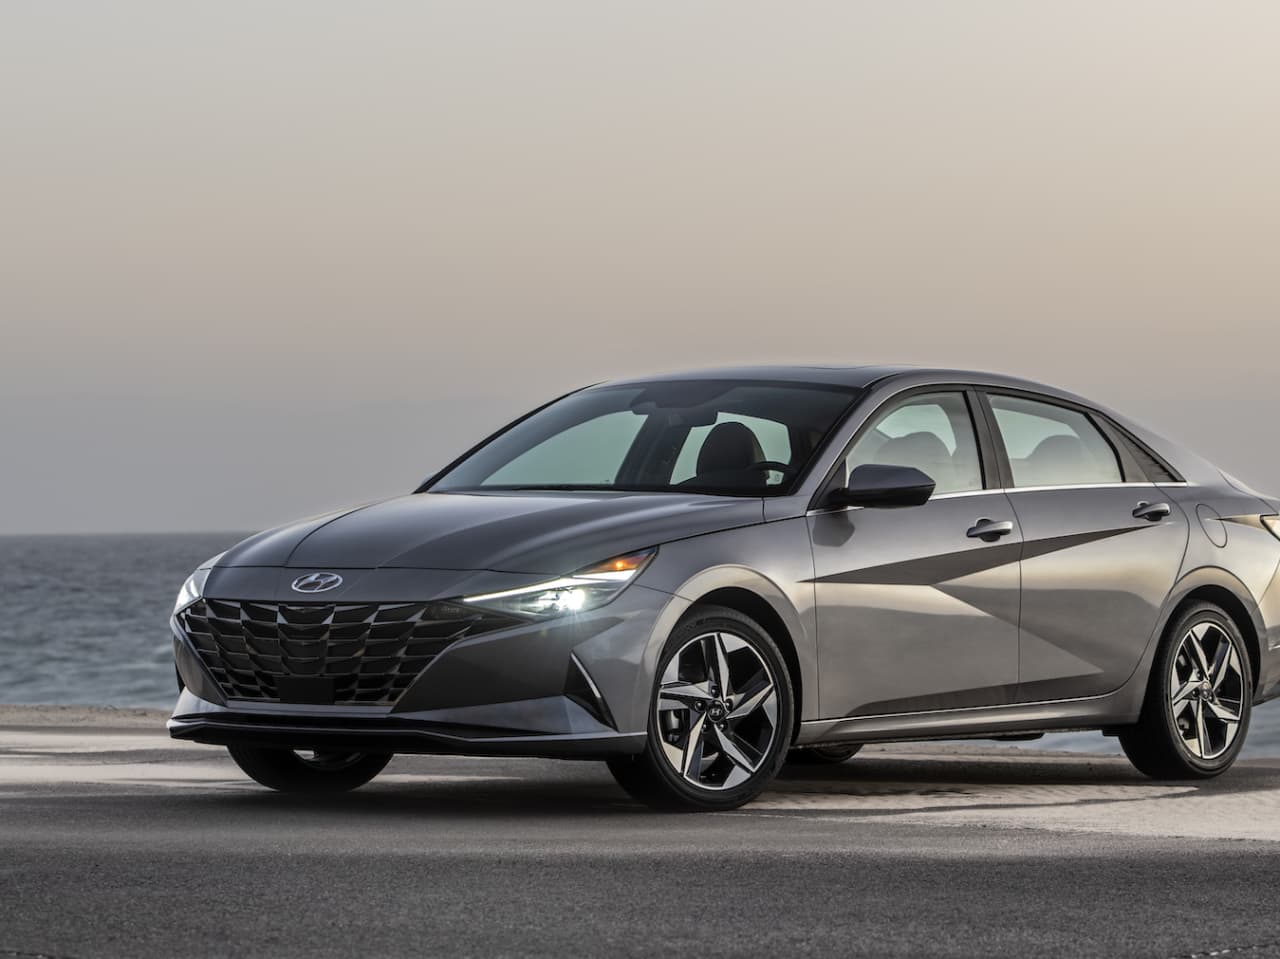 Collecting leaves robot Springboard The boldly-styled 2023 Hyundai Elantra Hybrid looks pretty cool and  averages a sweet 54 mpg - MarketWatch